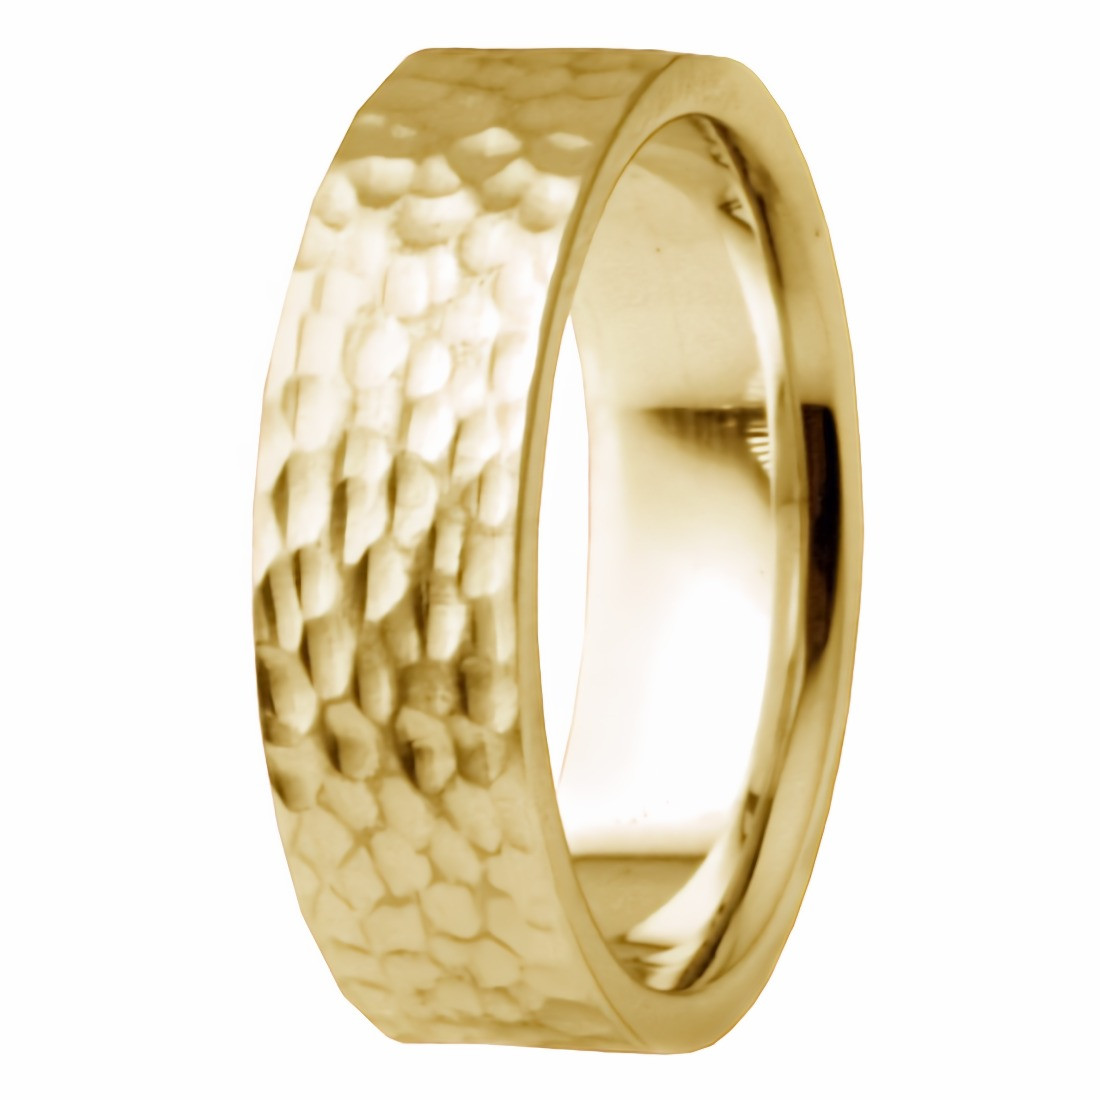 All-Hammered Flat 14k Gold Wedding Band Comfort-Fit Ring